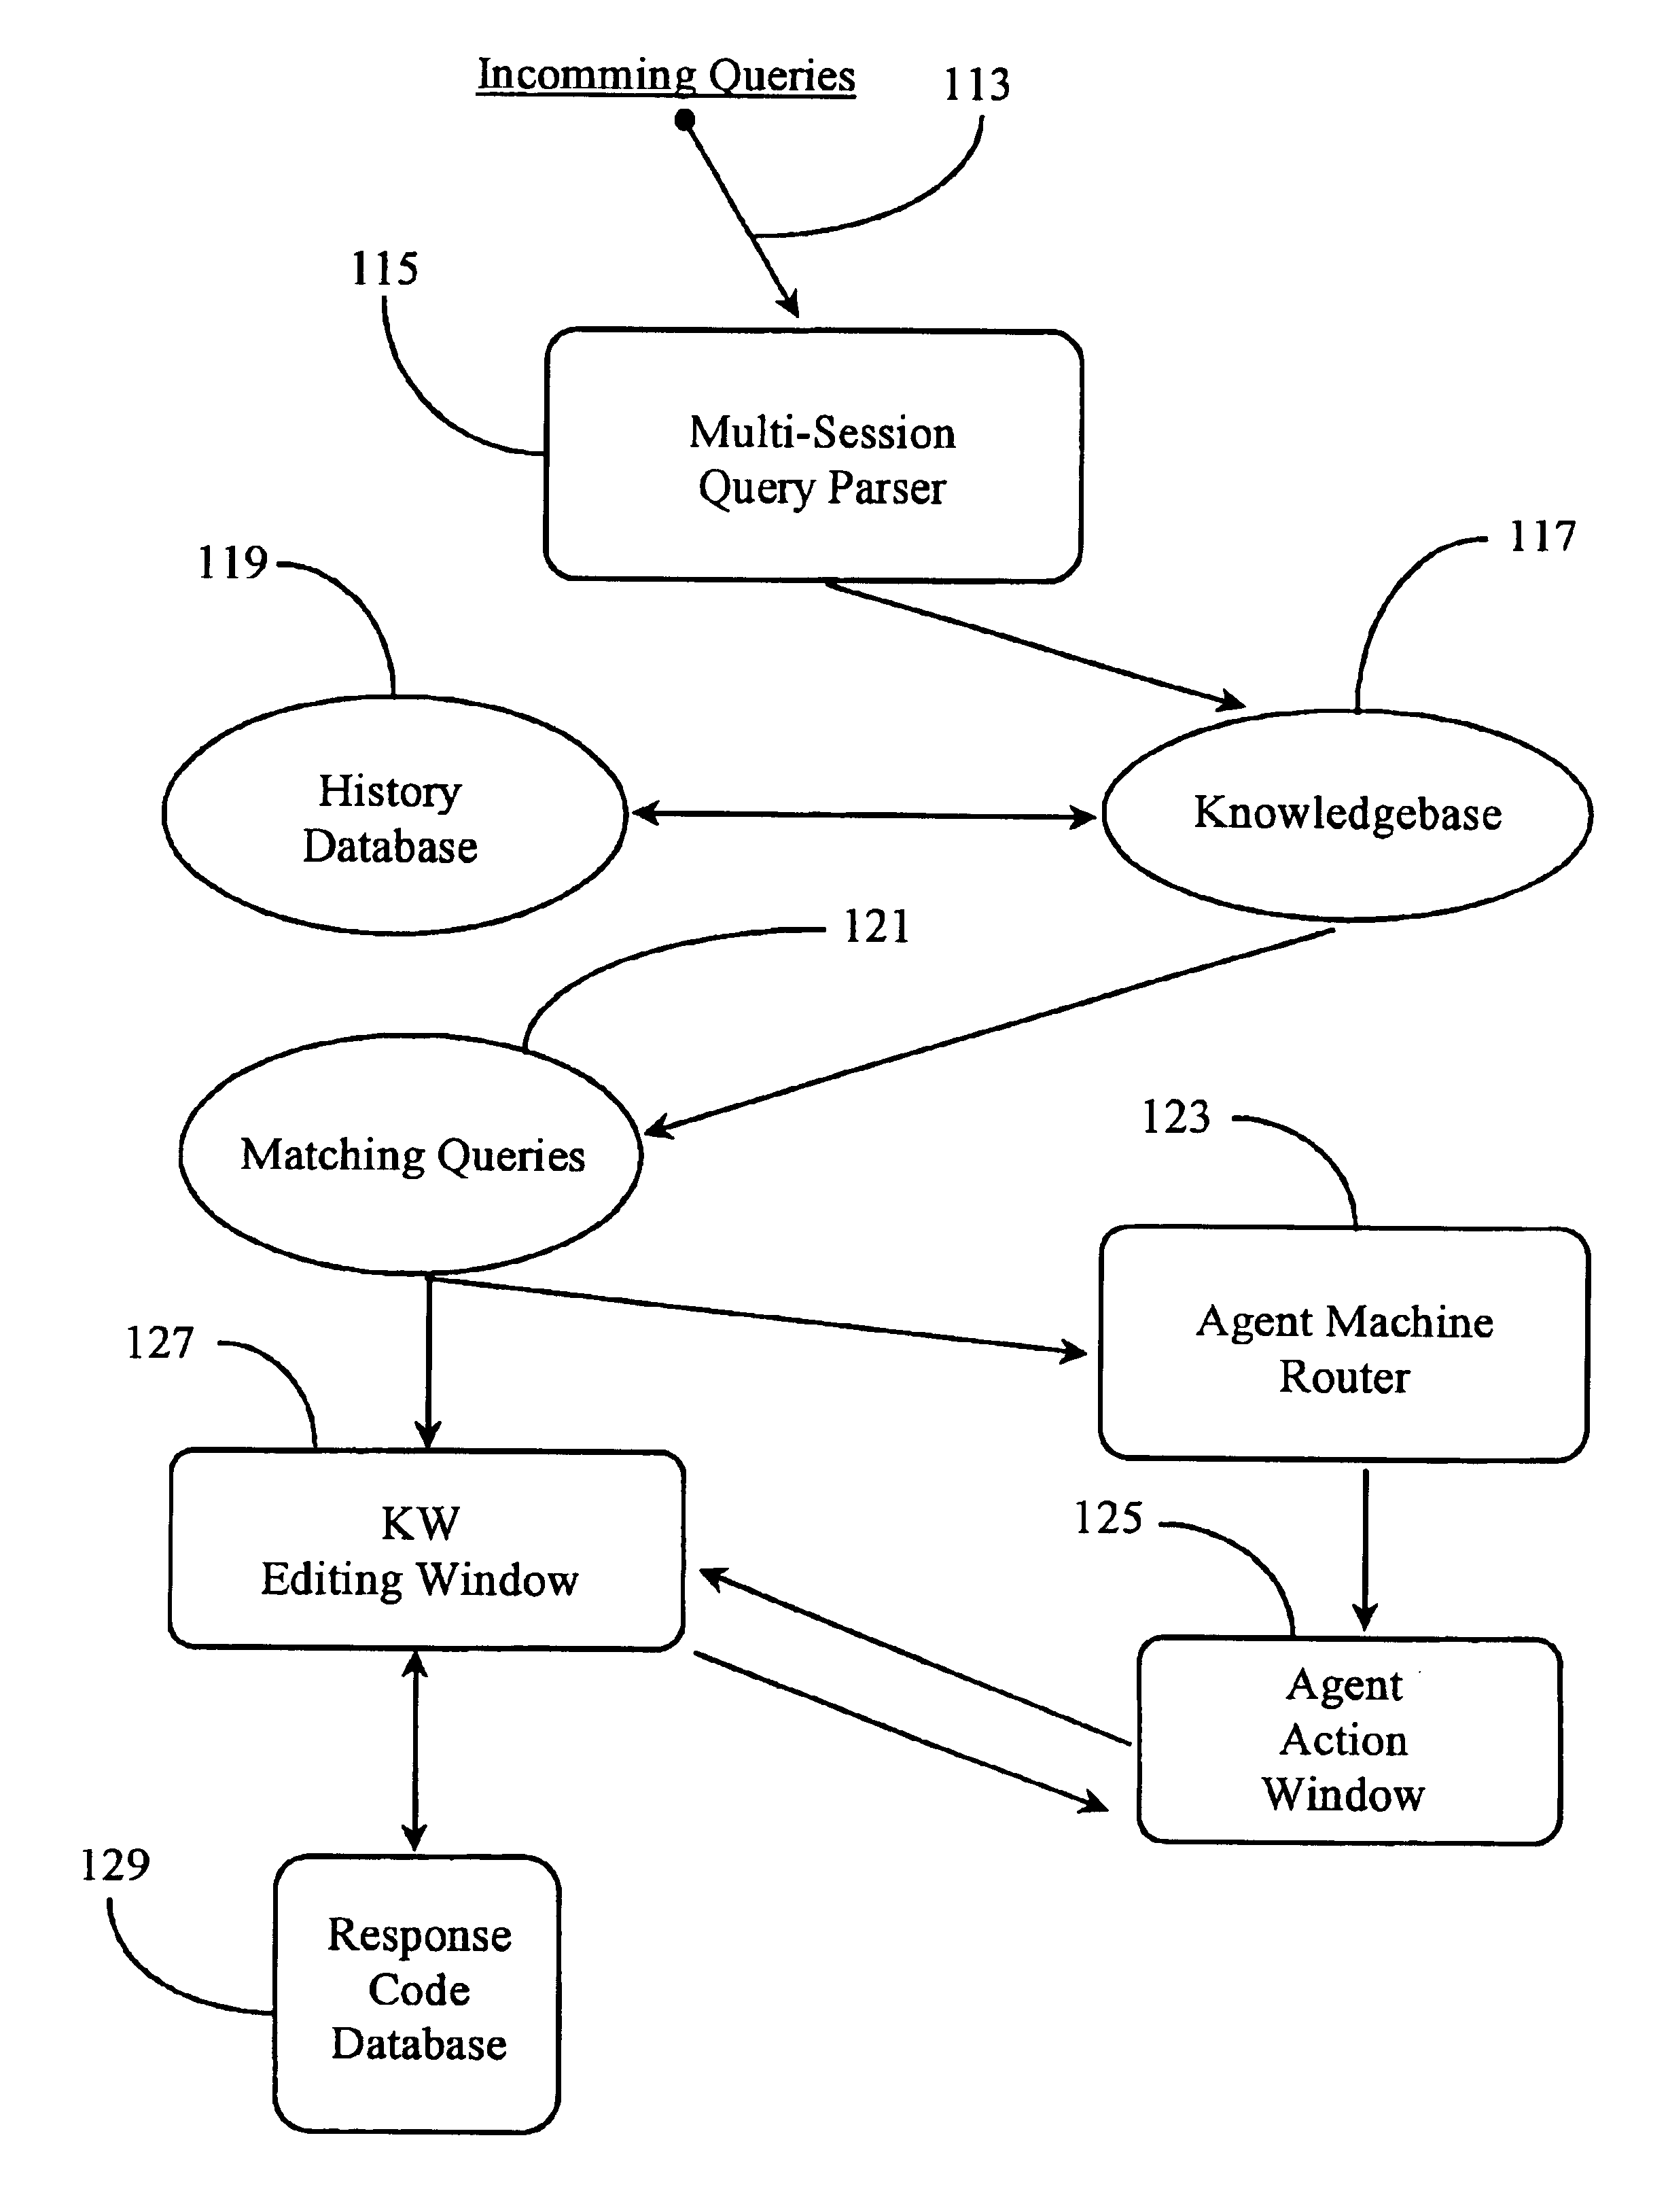 Method and apparatus for auto-assisting agents in agent-hosted communications sessions